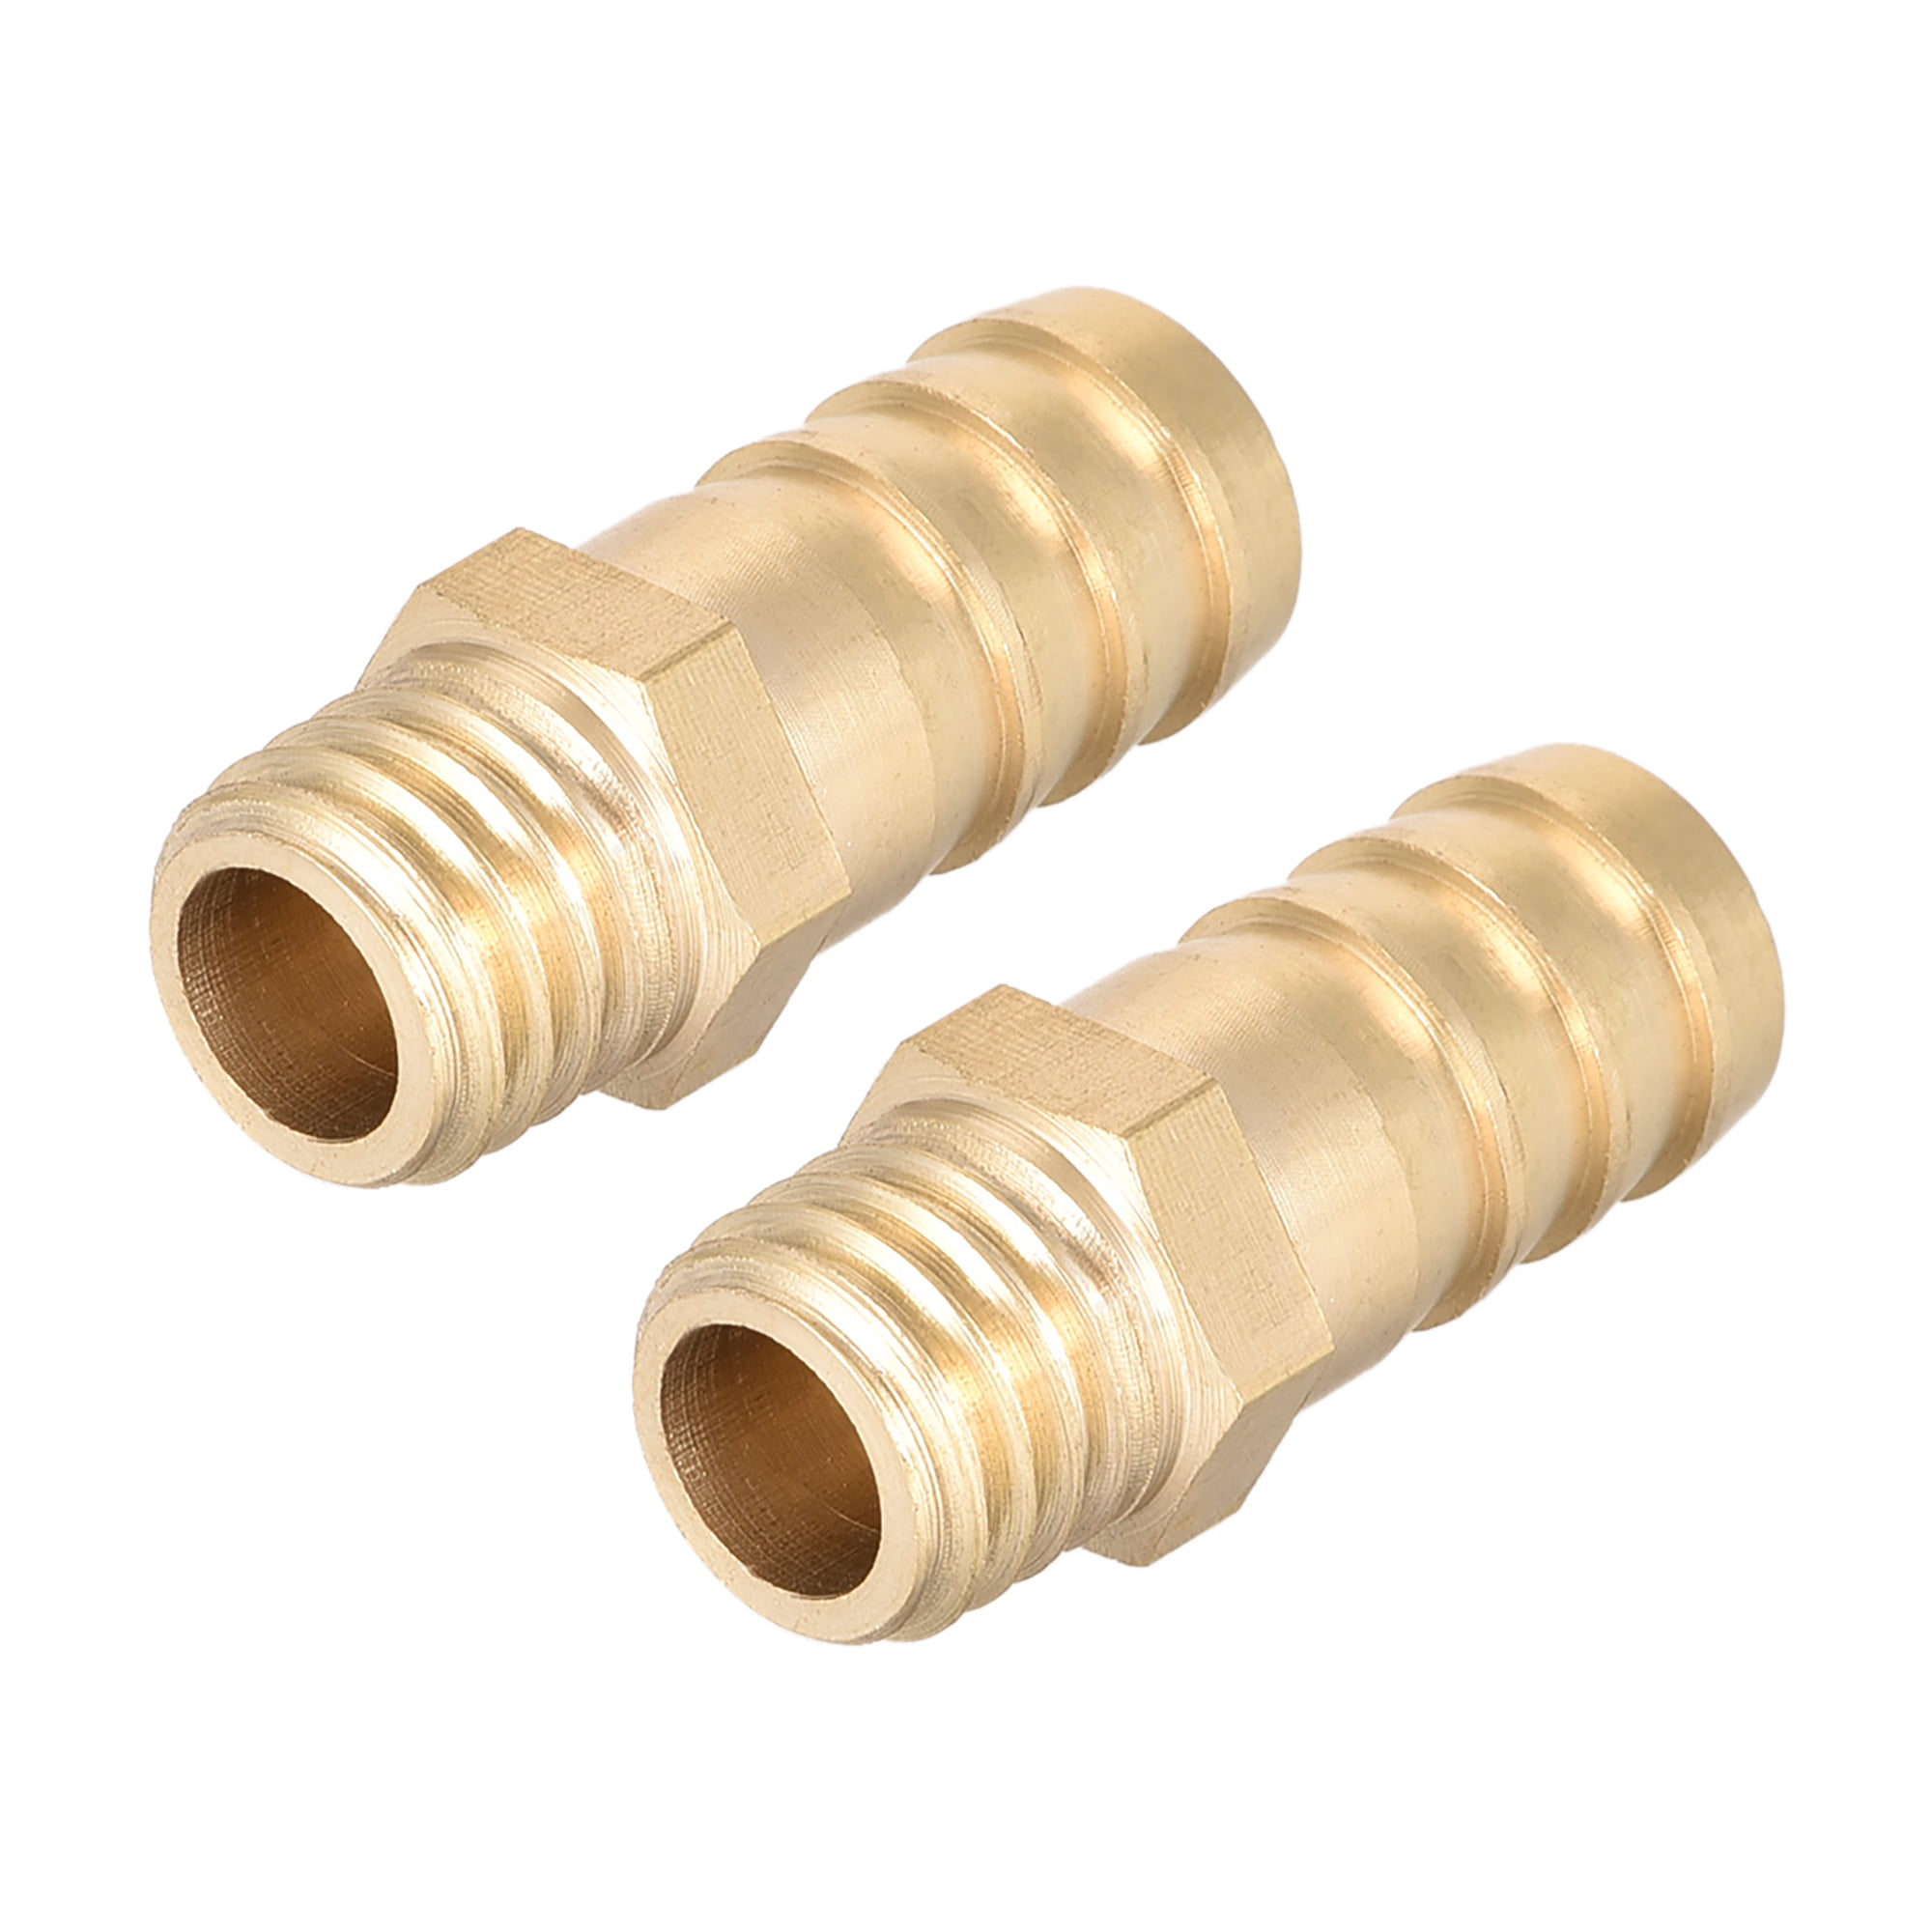 32mm Hose Barb x 1 Male BSP Thread Brass Barbed Pipe Fitting Coupler Connector Adapter For Fuel Gas Water 